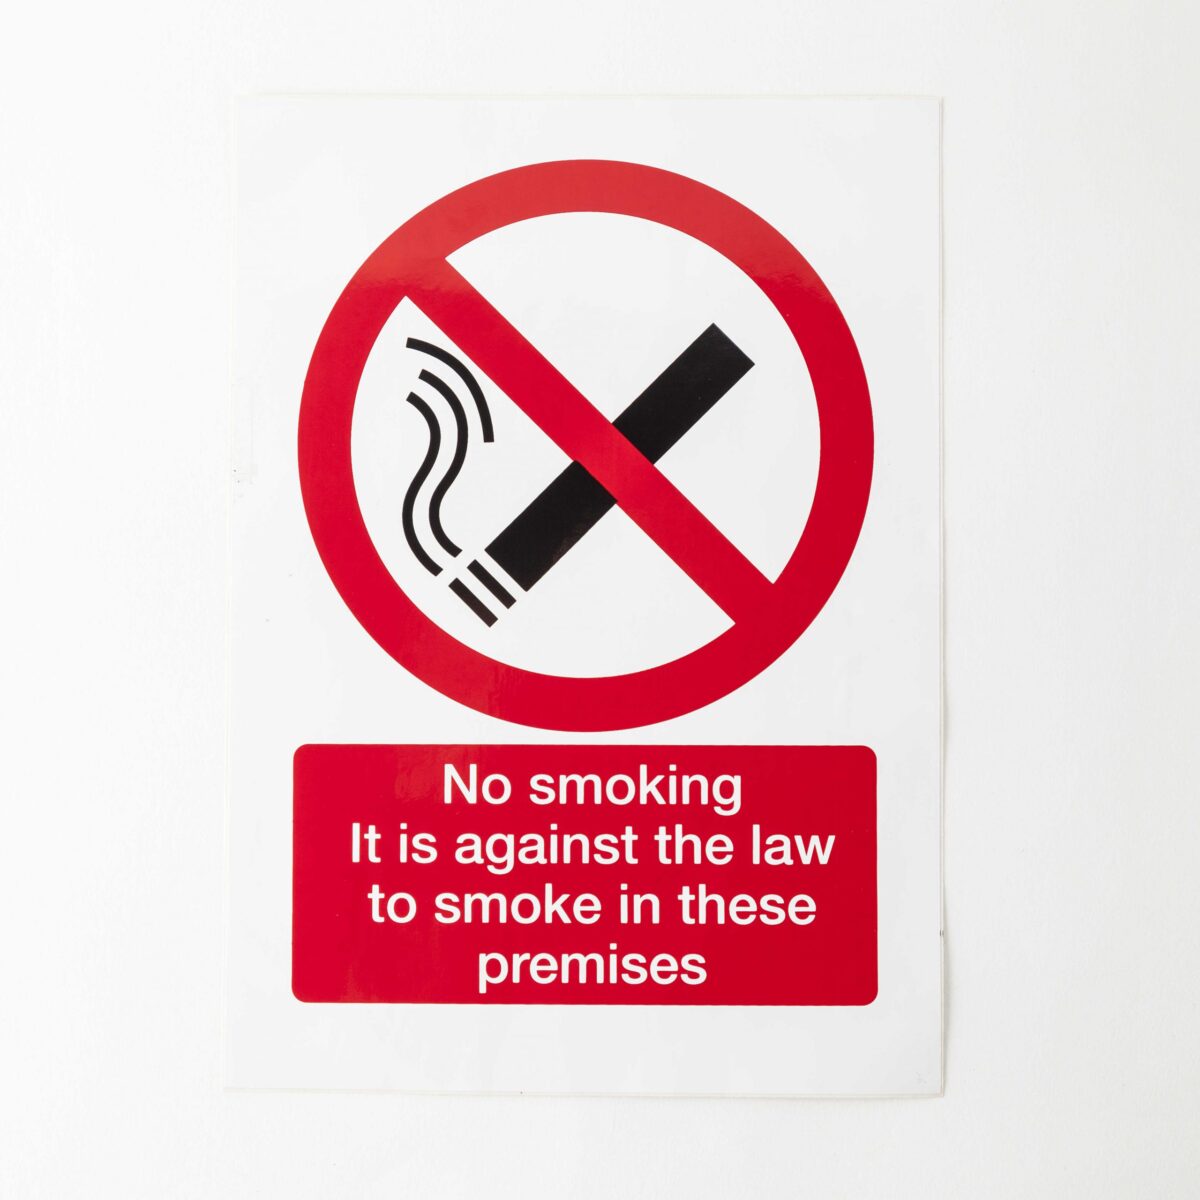 Front Adhesive Warning & Safety Signs